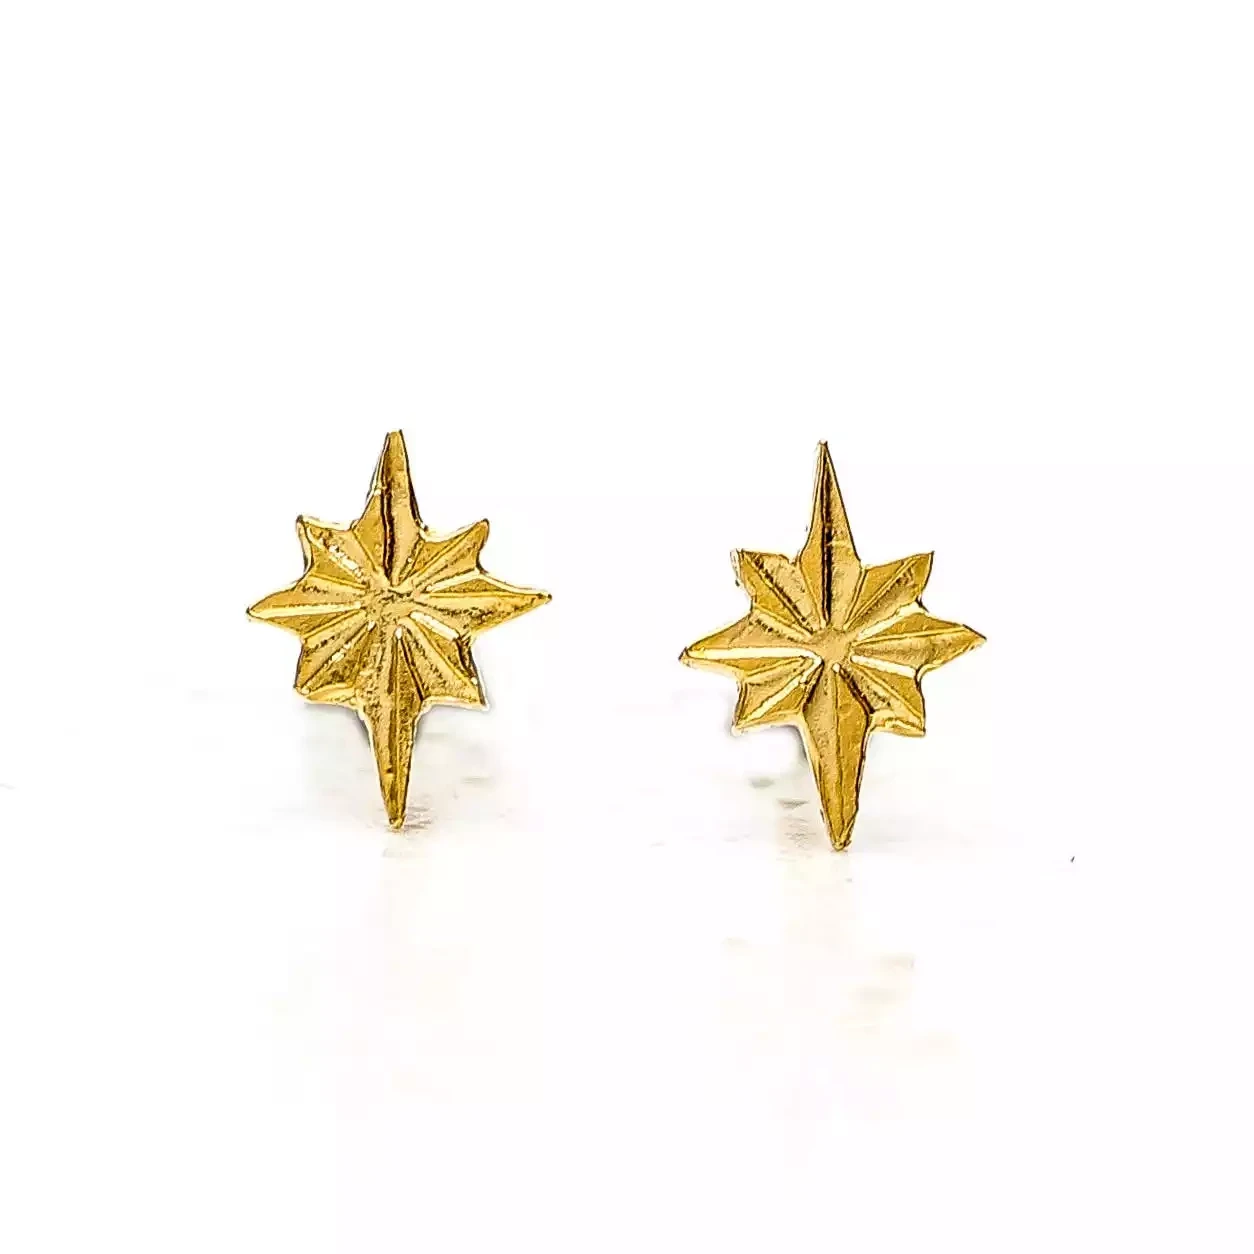 Star Stud Earrings - Gold Plated by Amanda Coleman